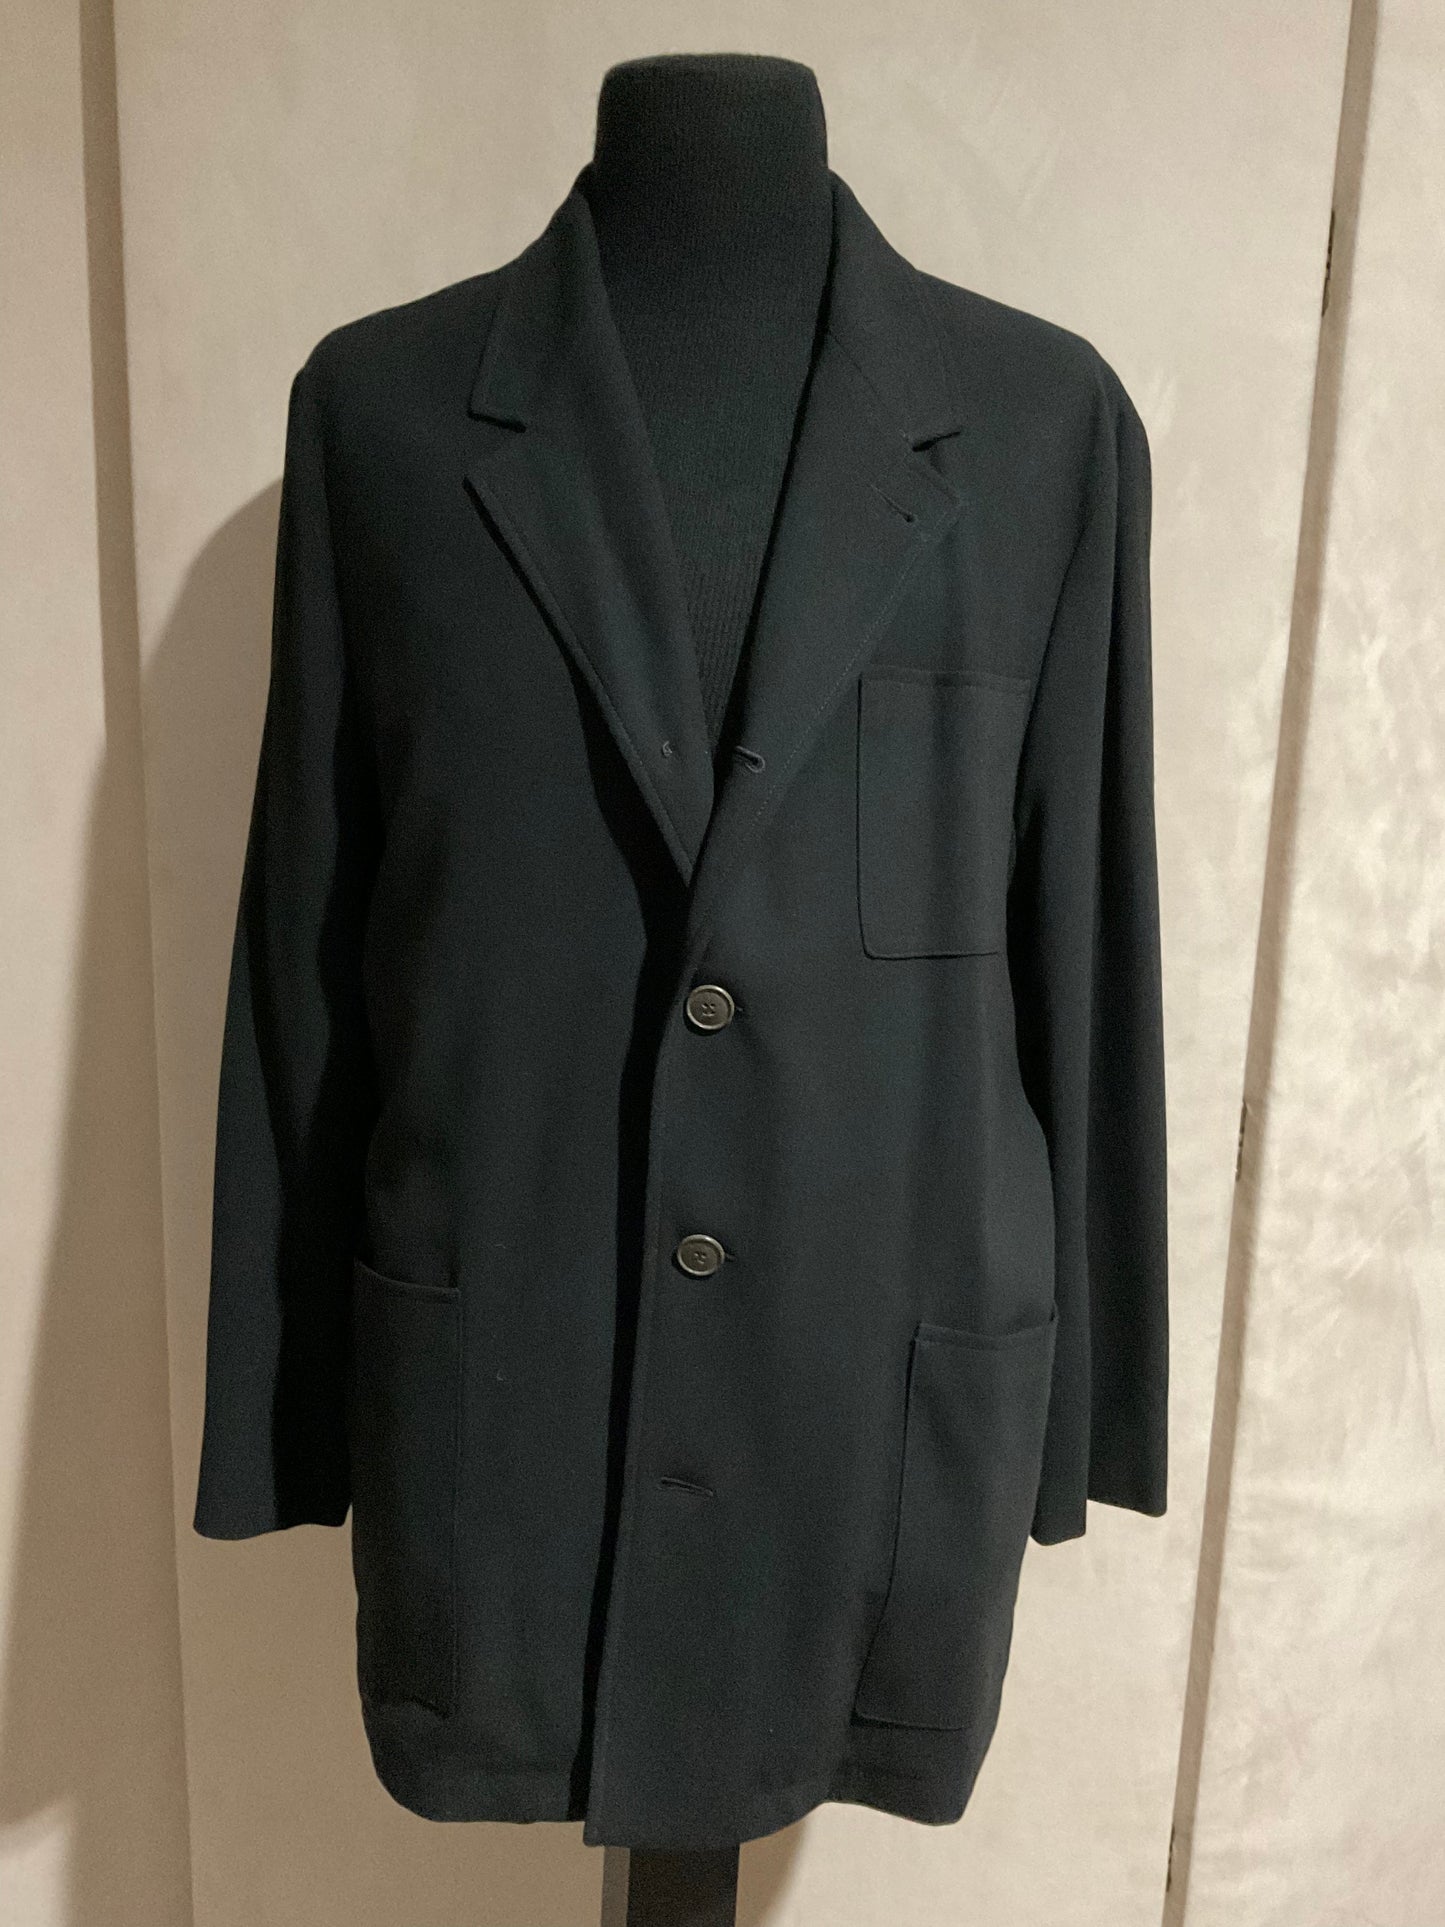 R P SUIT / BLACK CREPE 4 BUTTON / UNCONSTRUCTED / MEDIUM - LARGE / MADE IN USA